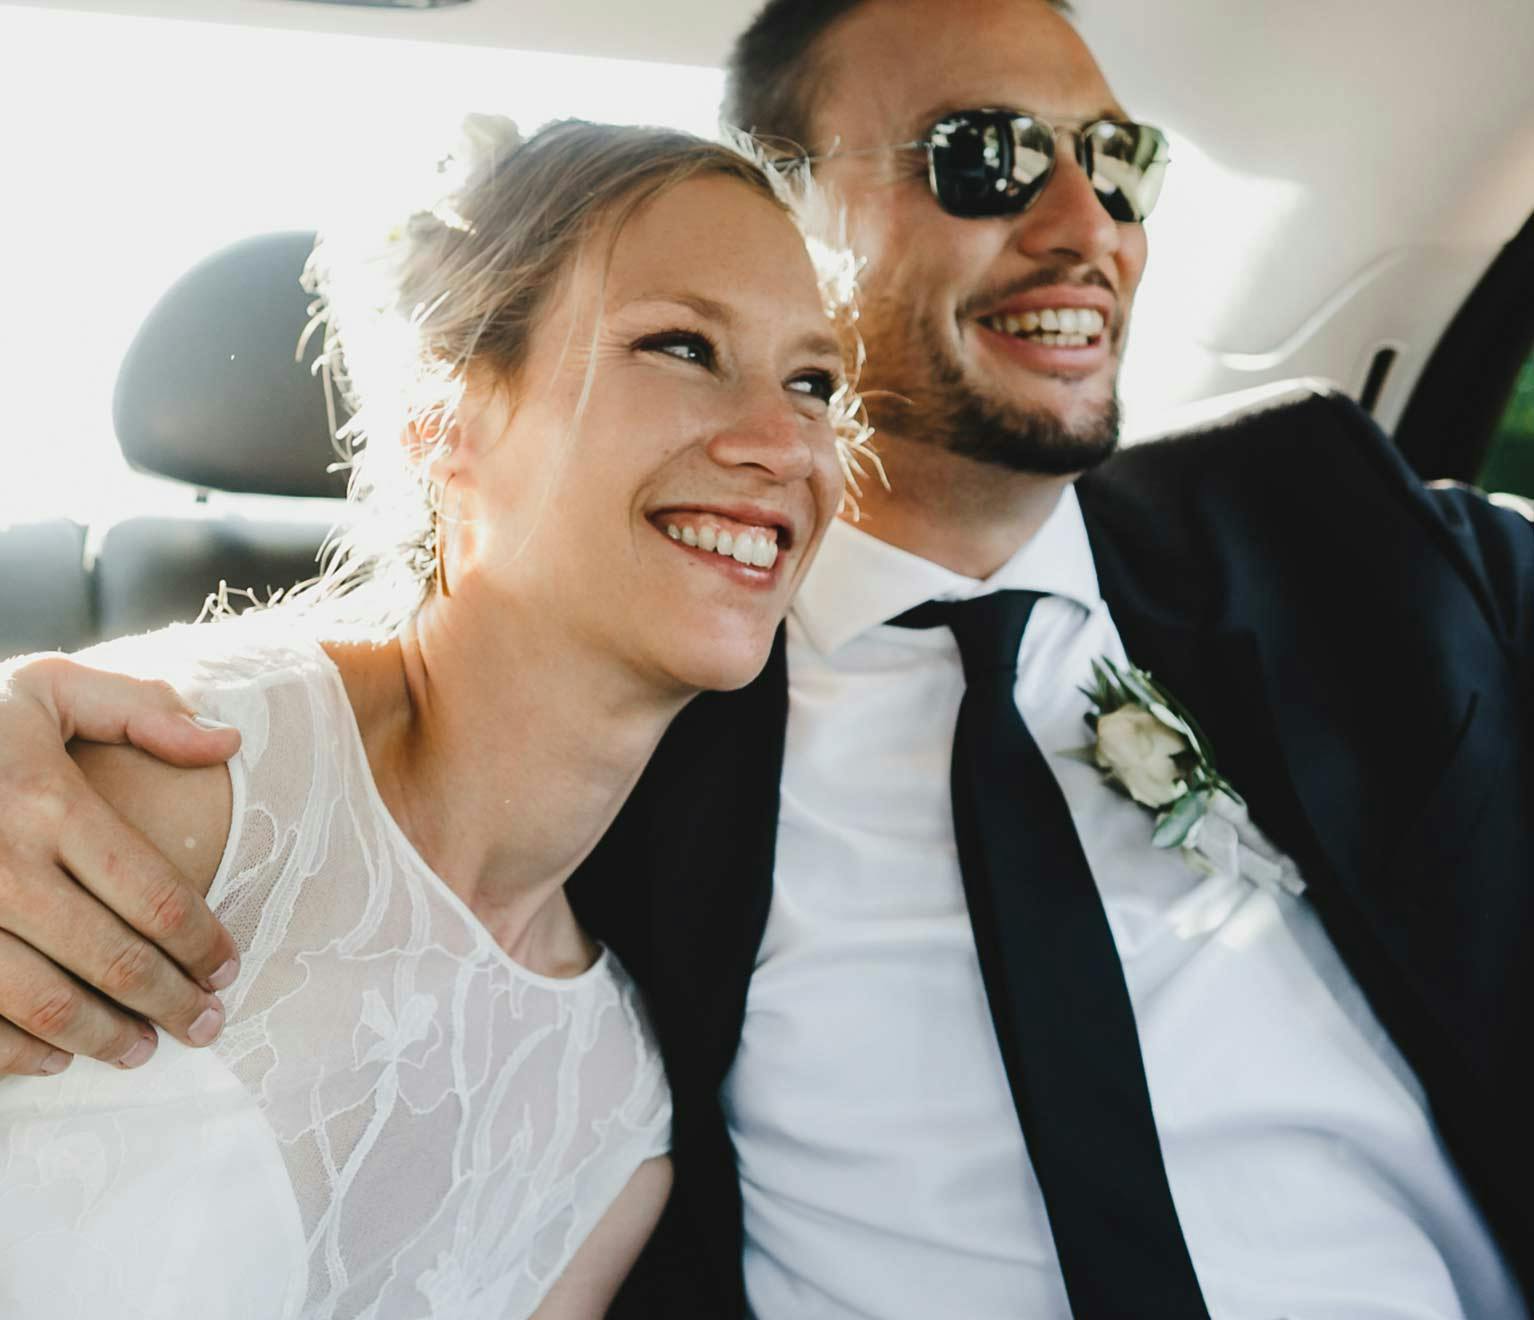 Image of a newlywed couple in their car.